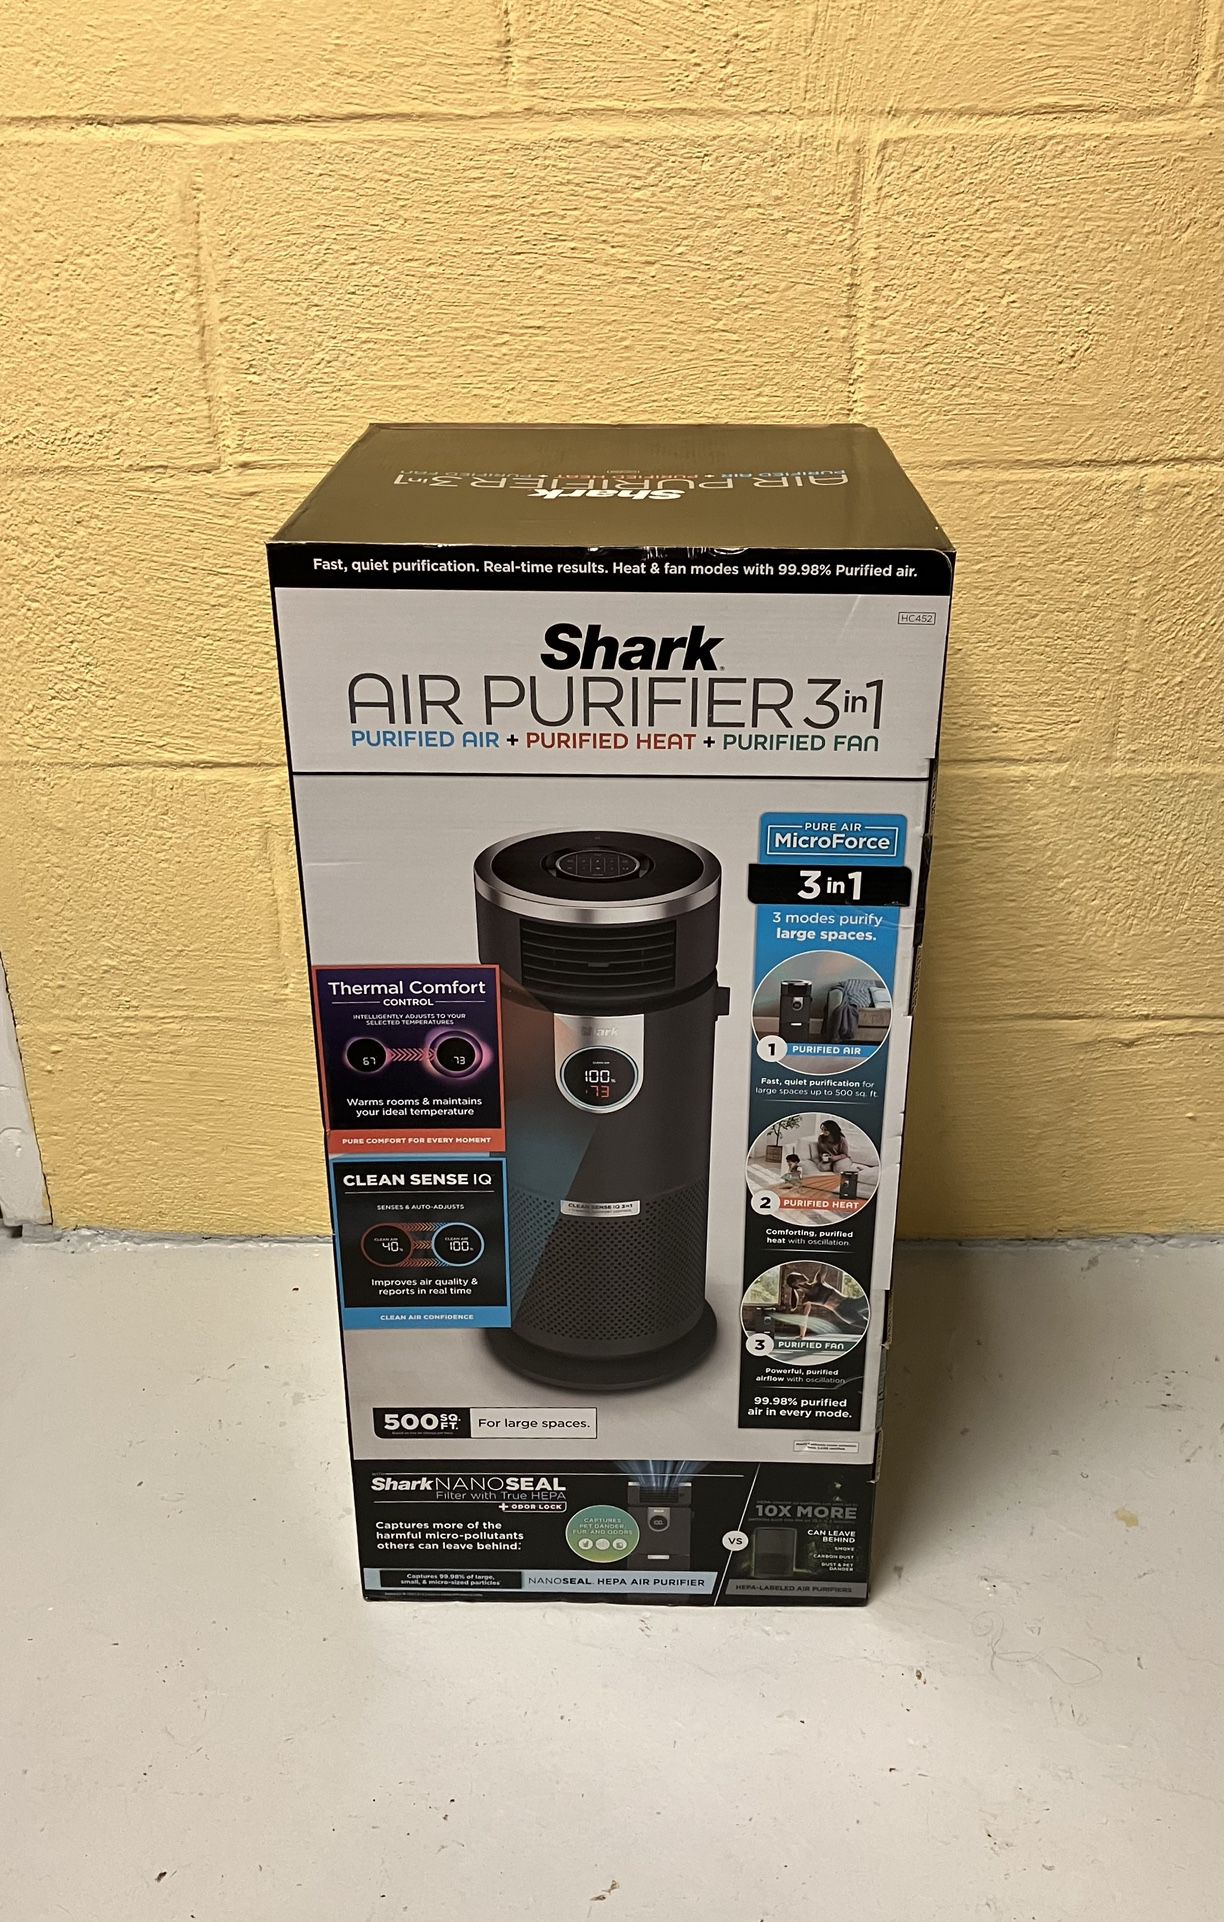 NEW Shark HC452 Home Air Purifier 3-in-1 with HEPA Filter, Space Heater + Fan Combo Purified